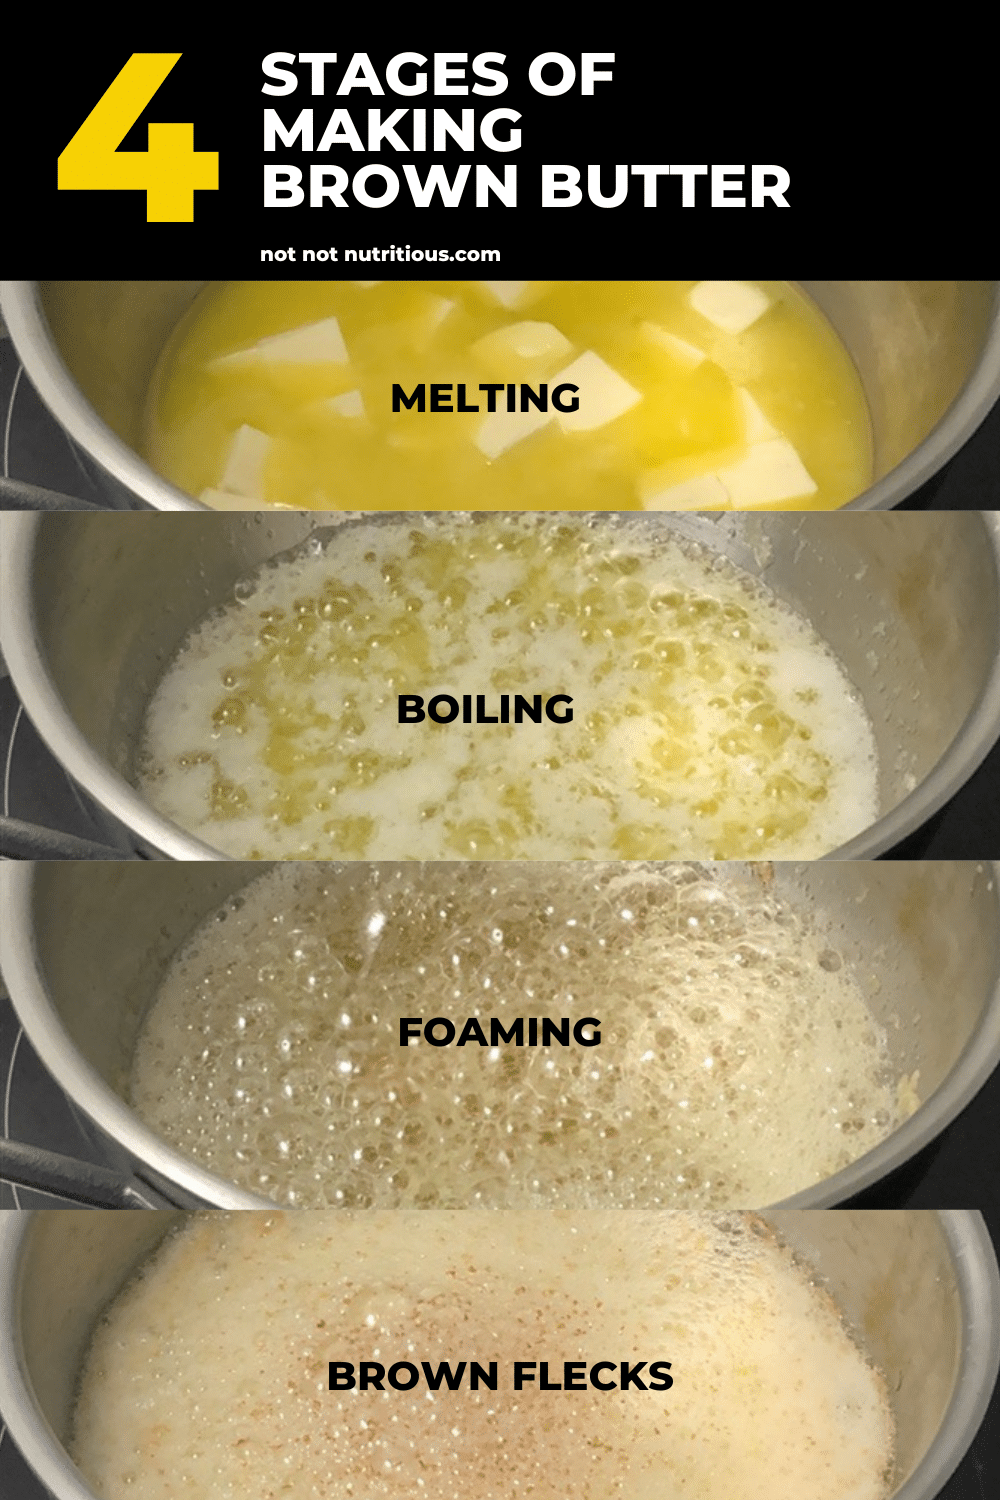 Infographic: 4 Stages of Making Brown Butter. Stage 1: Melting. Stage 2: Boiling. Stage 3: Foaming. Stage 4: Brown Flecks